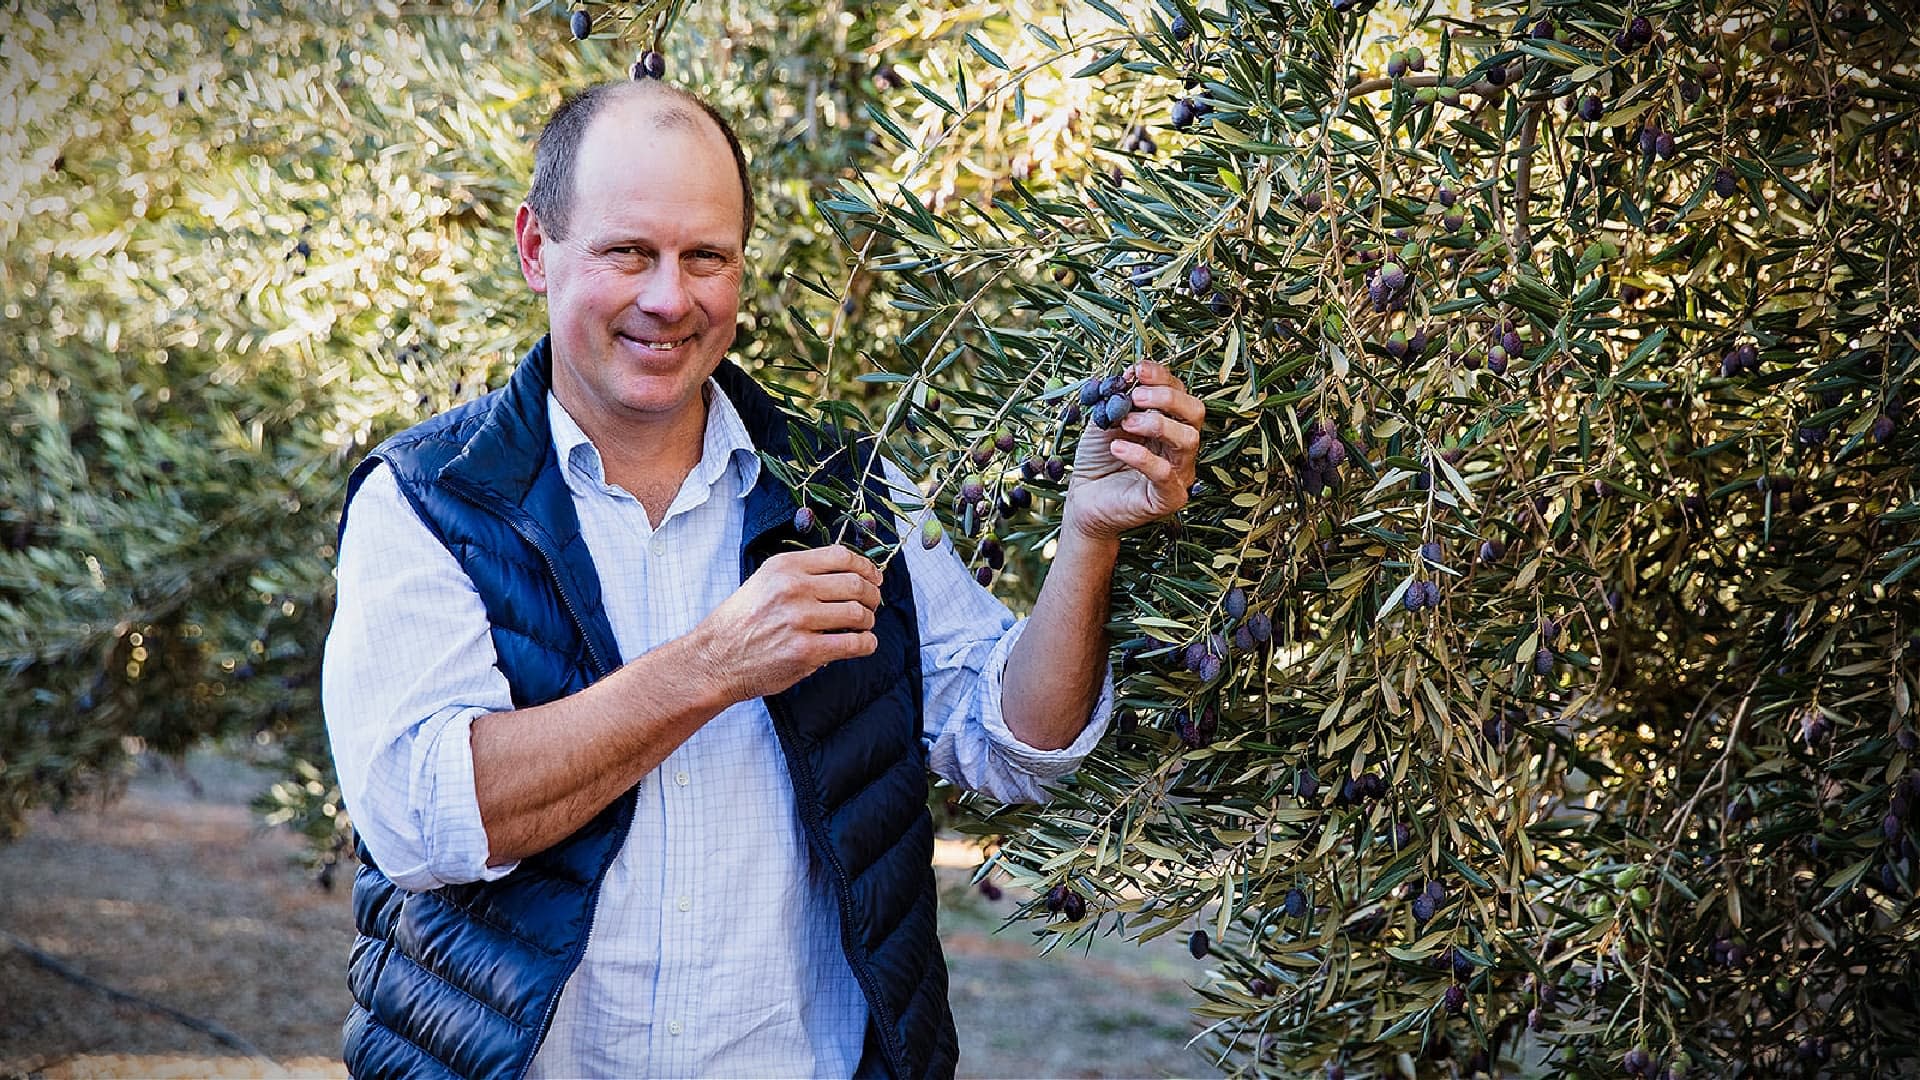 australia-and-new-zealand-business-production-olive-oil-times